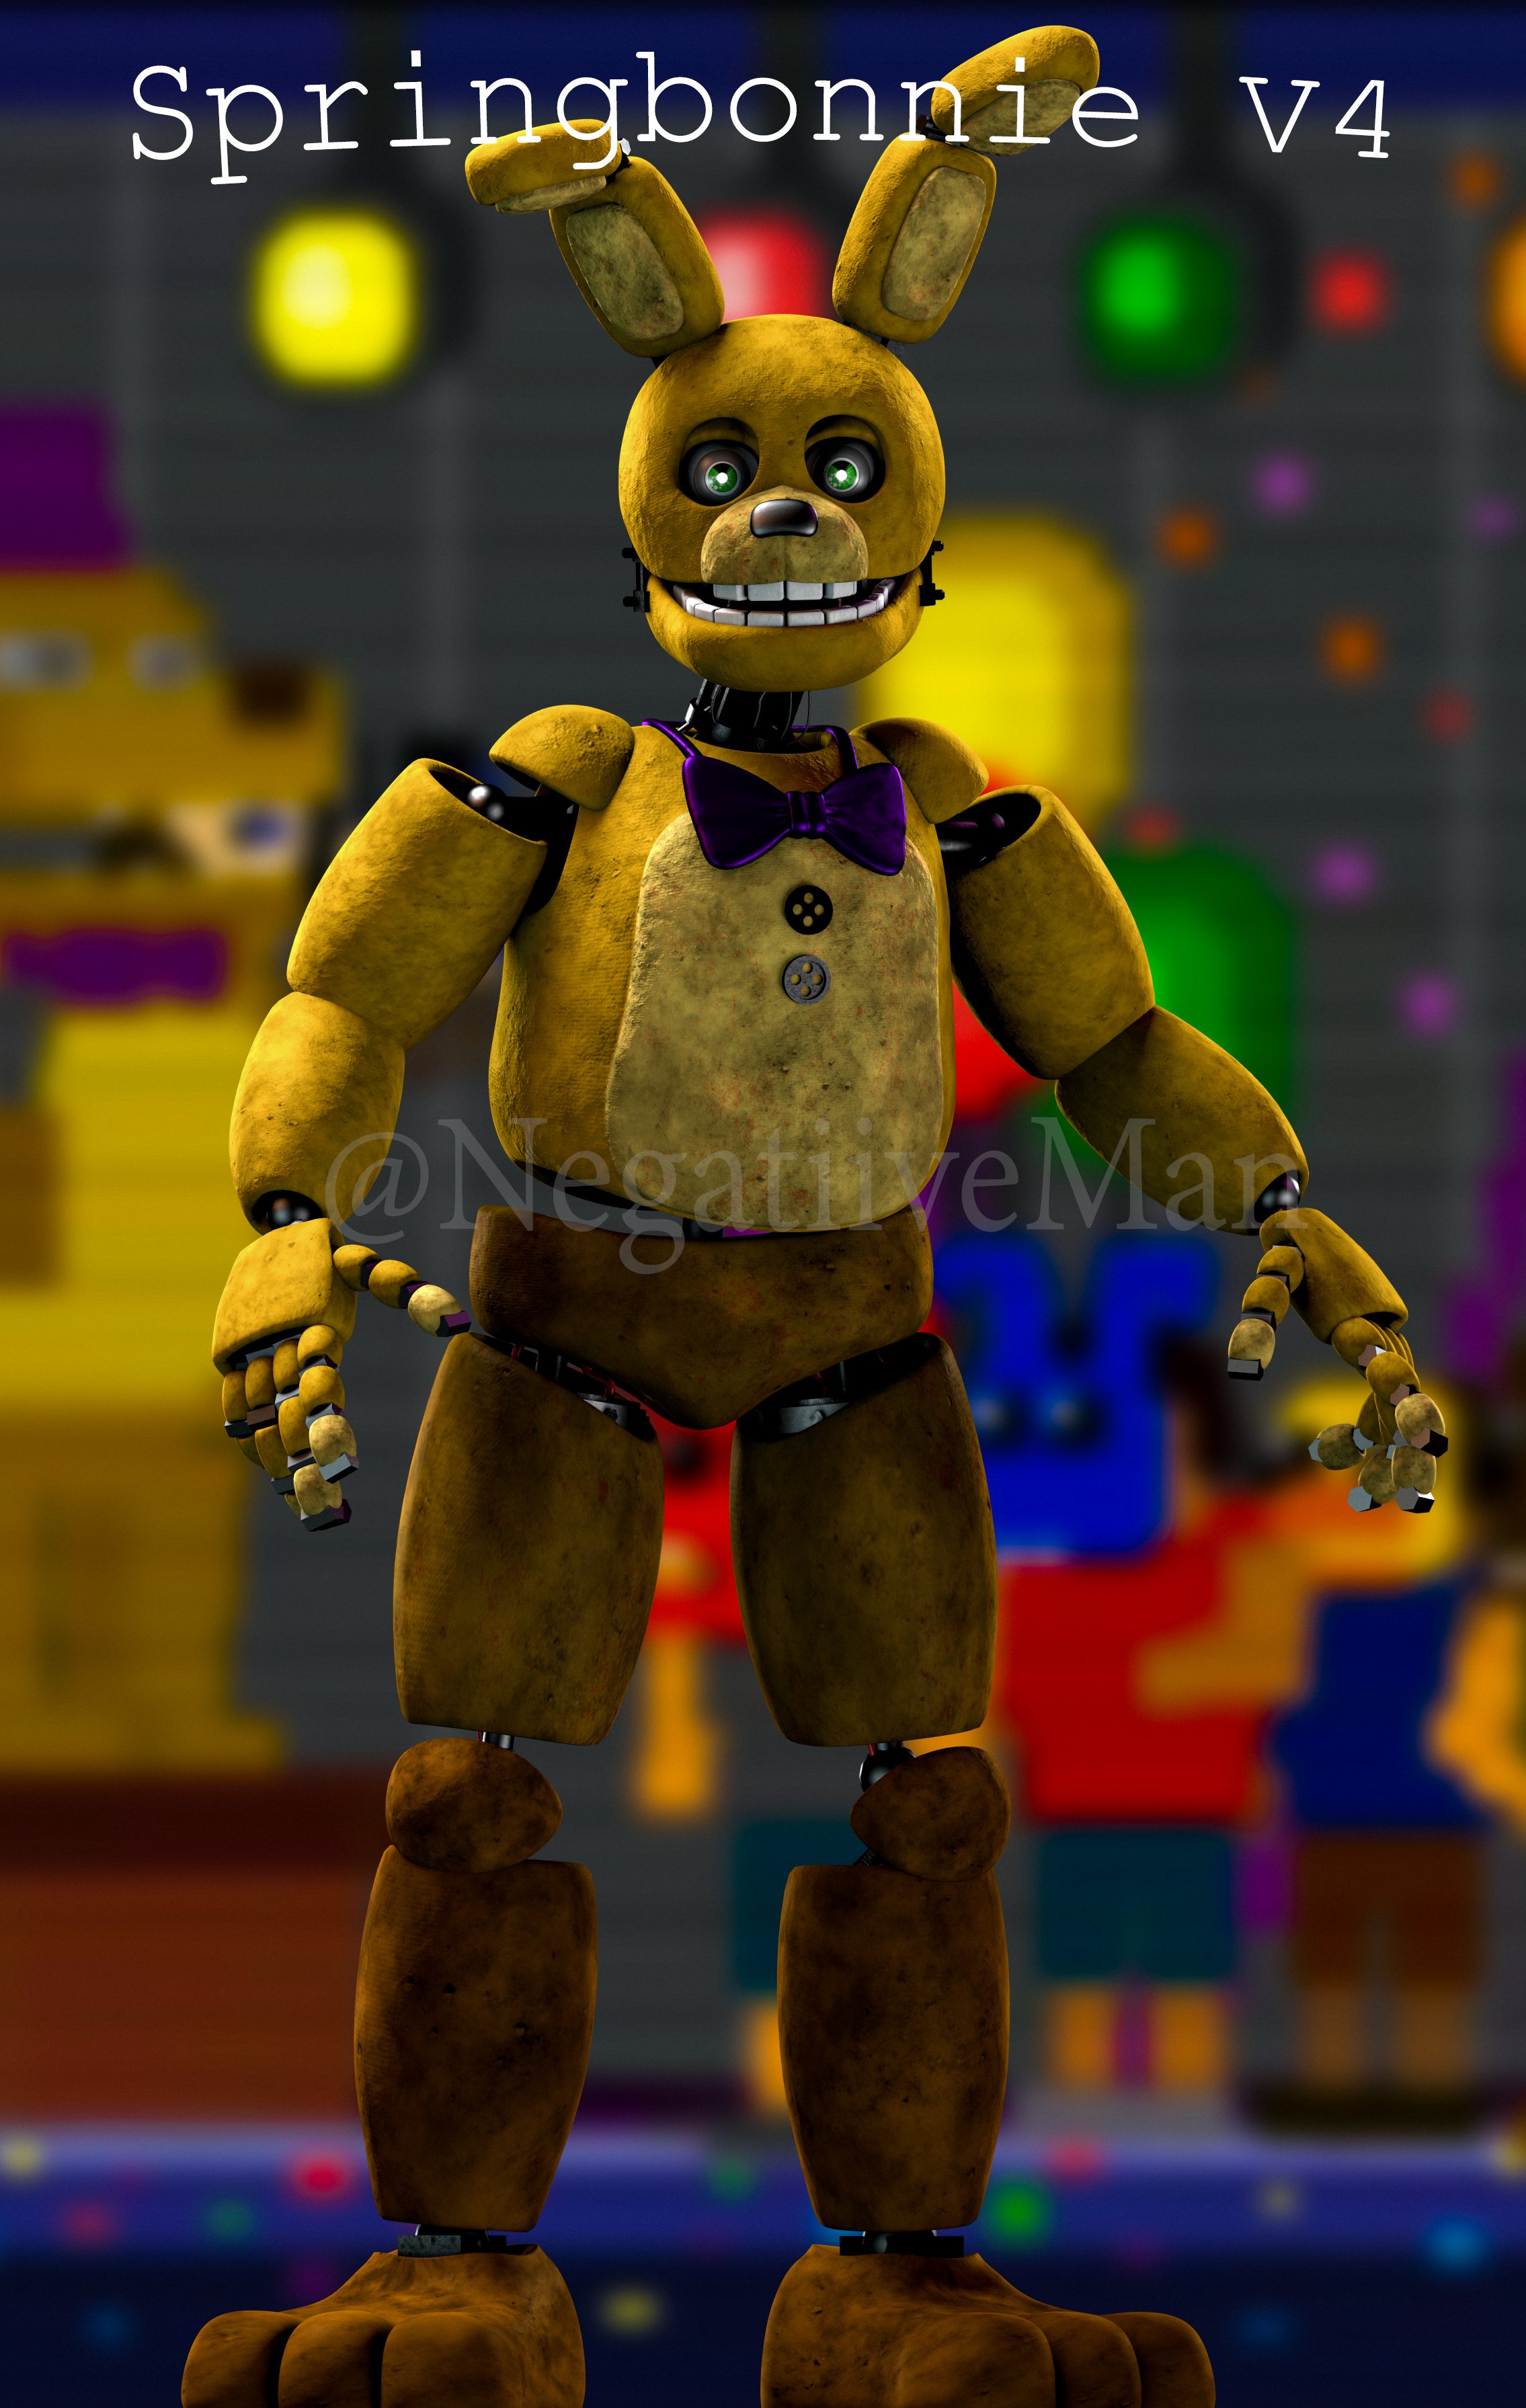 thesaurus sweater Dissipation Negatiive on Twitter: "Continuation showcase image of the springbon model.  There's some things that seem off with it, but I'm seeing this as a well  needed improvement overall. #FNAF #springbonnie #blender #Blender3d #